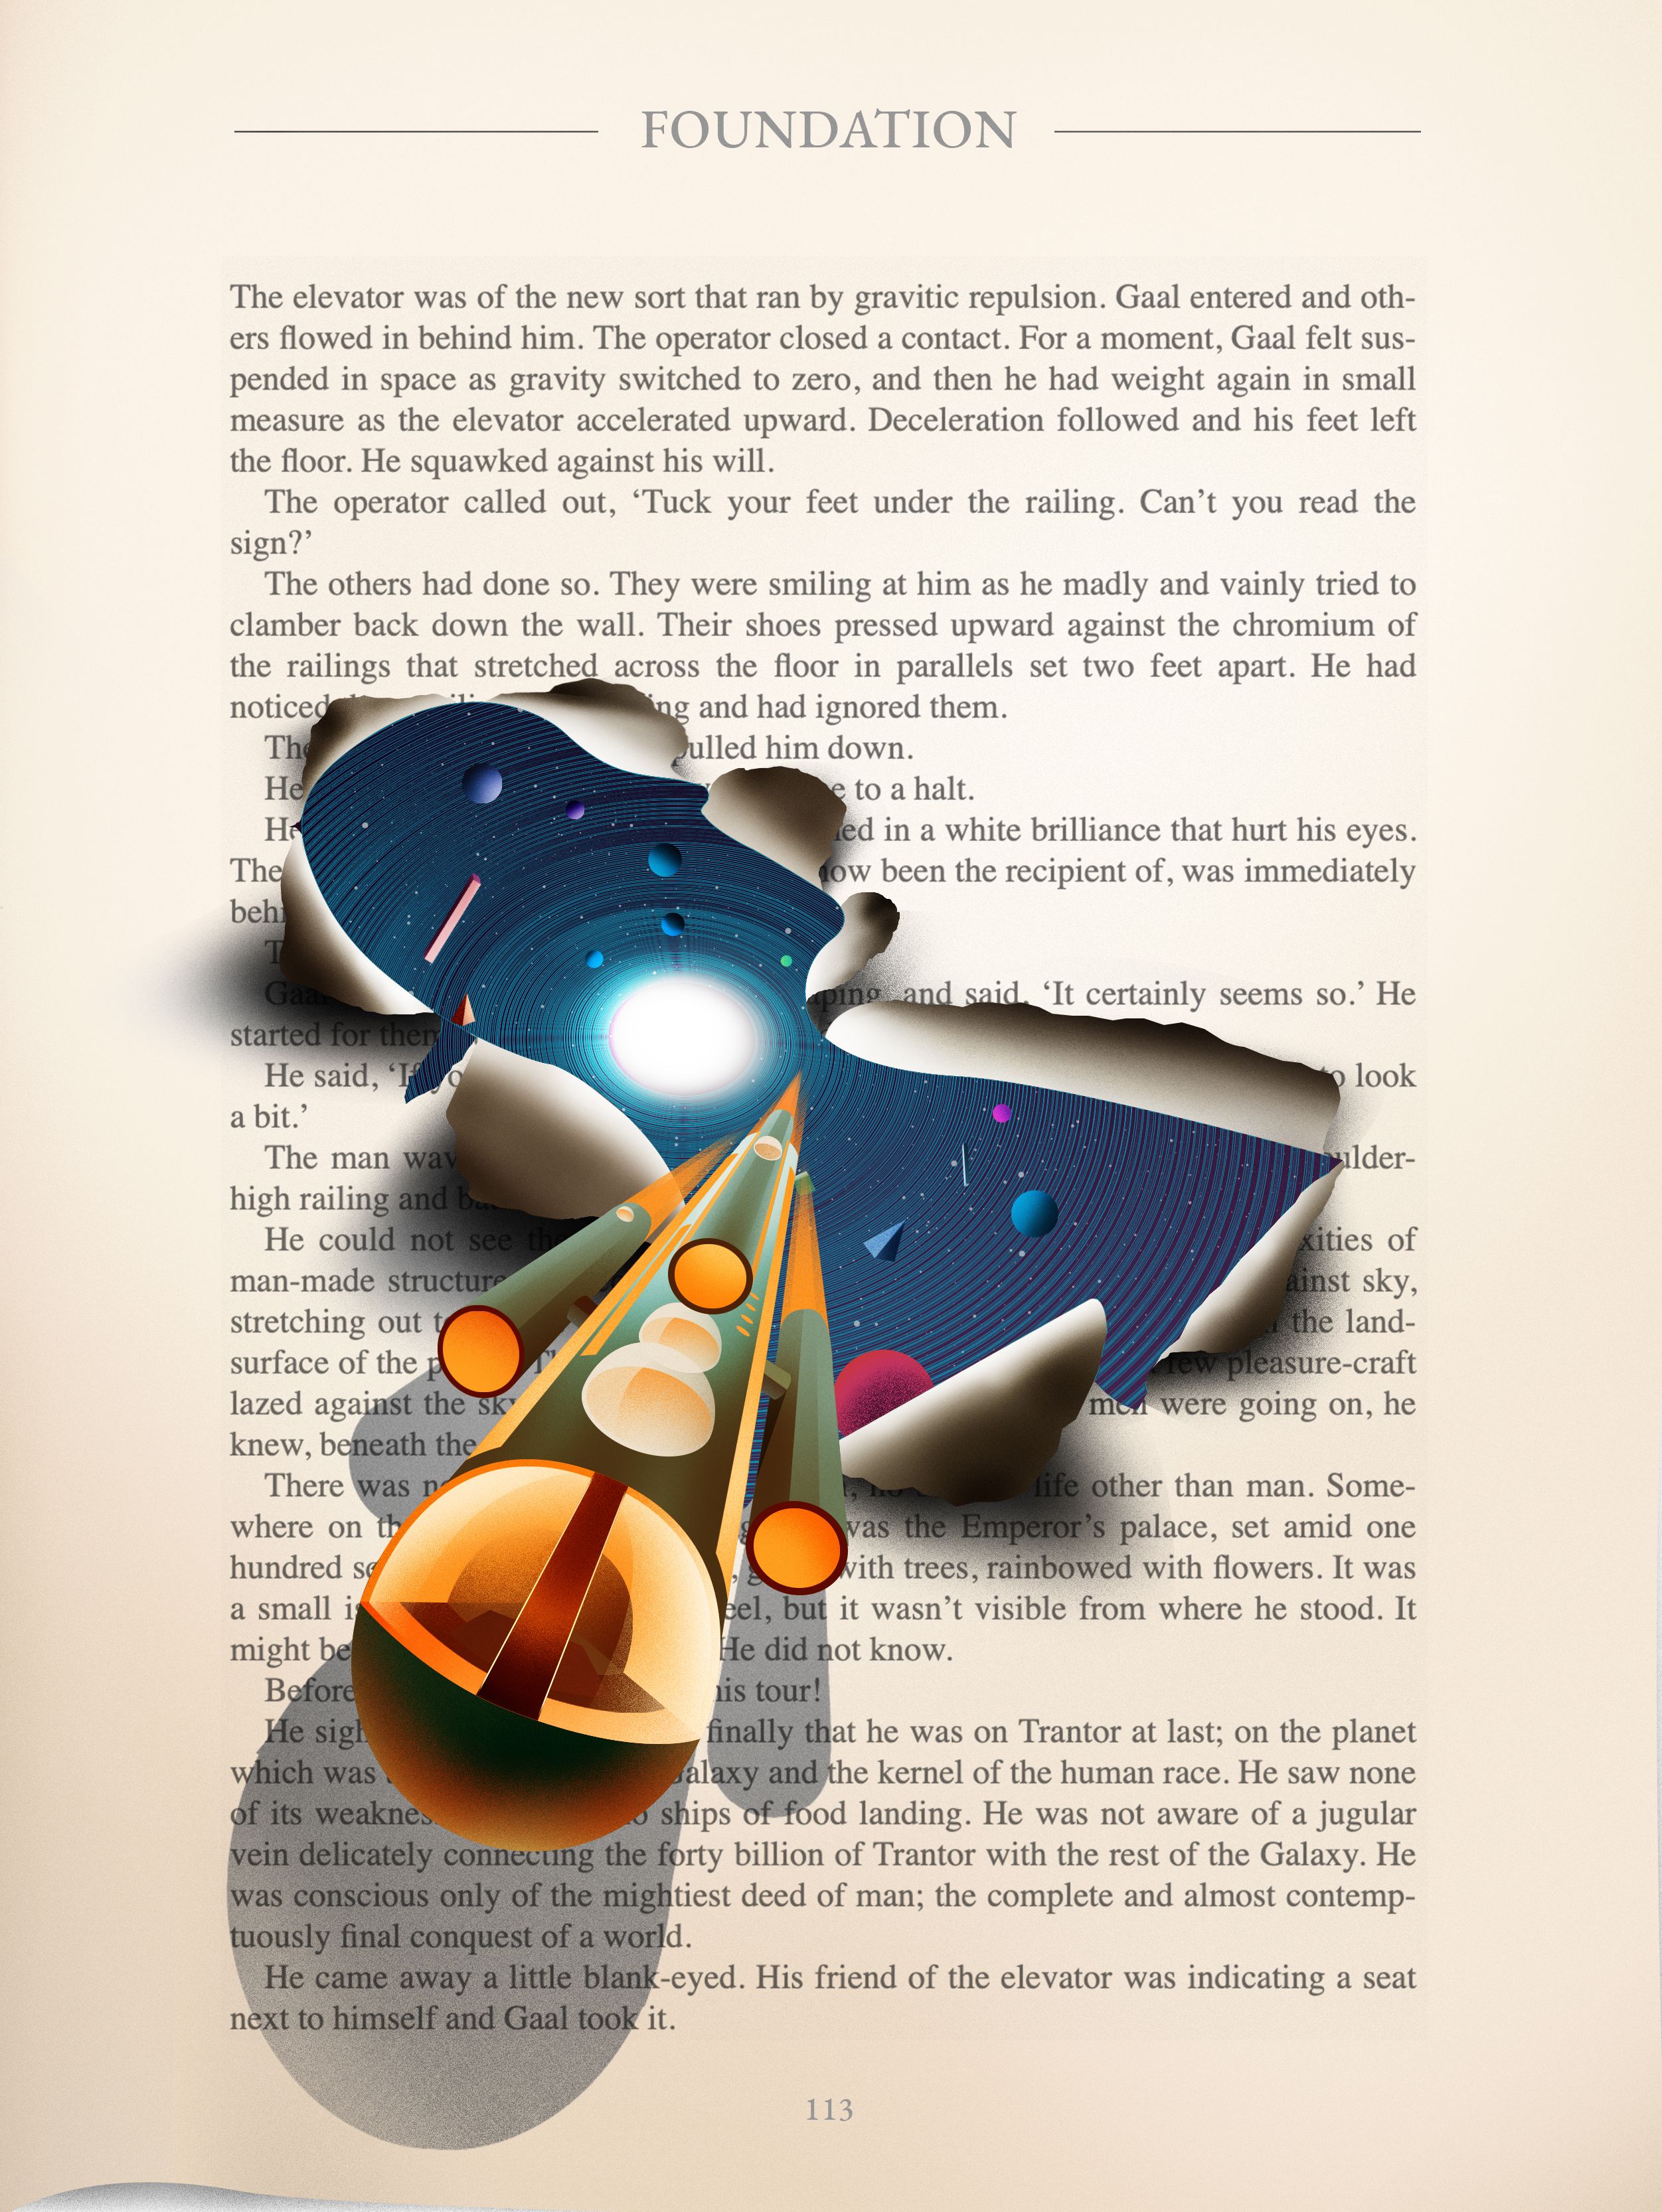 Illustration of spaceship breaking through the page of a book